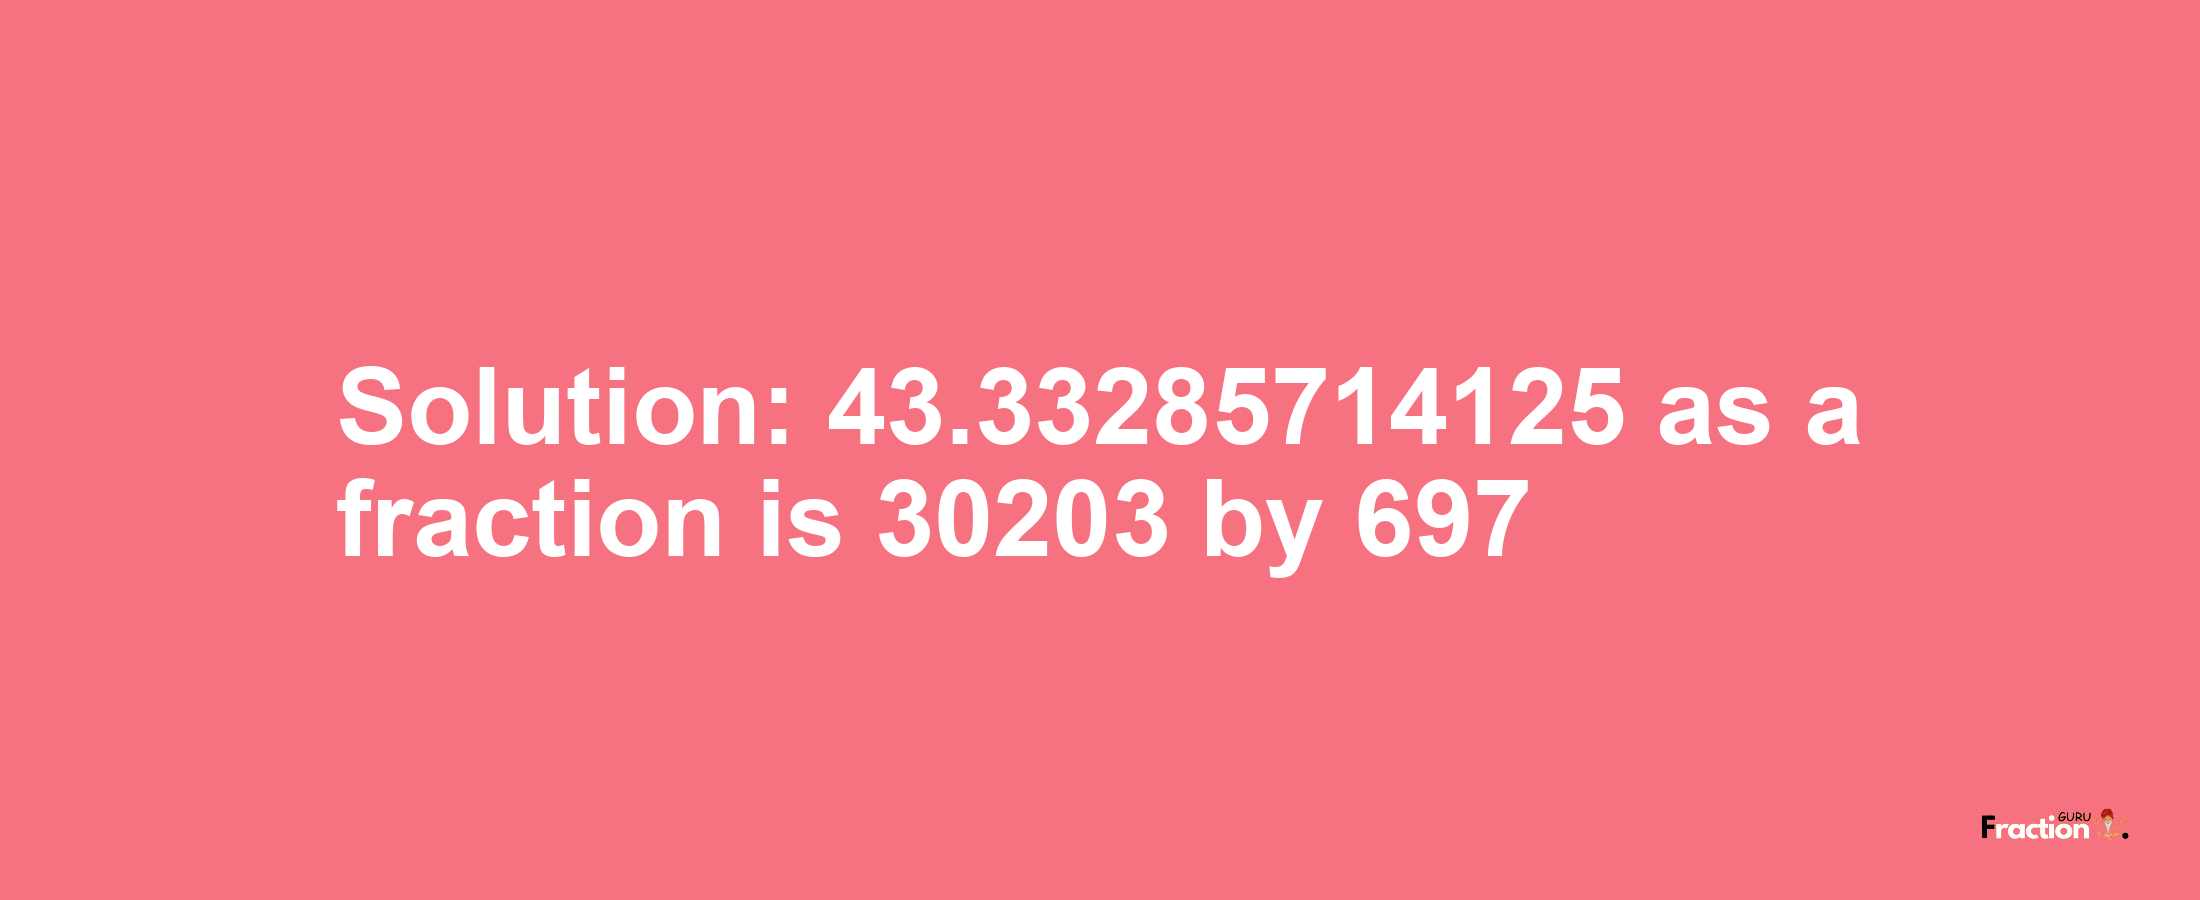 Solution:43.33285714125 as a fraction is 30203/697